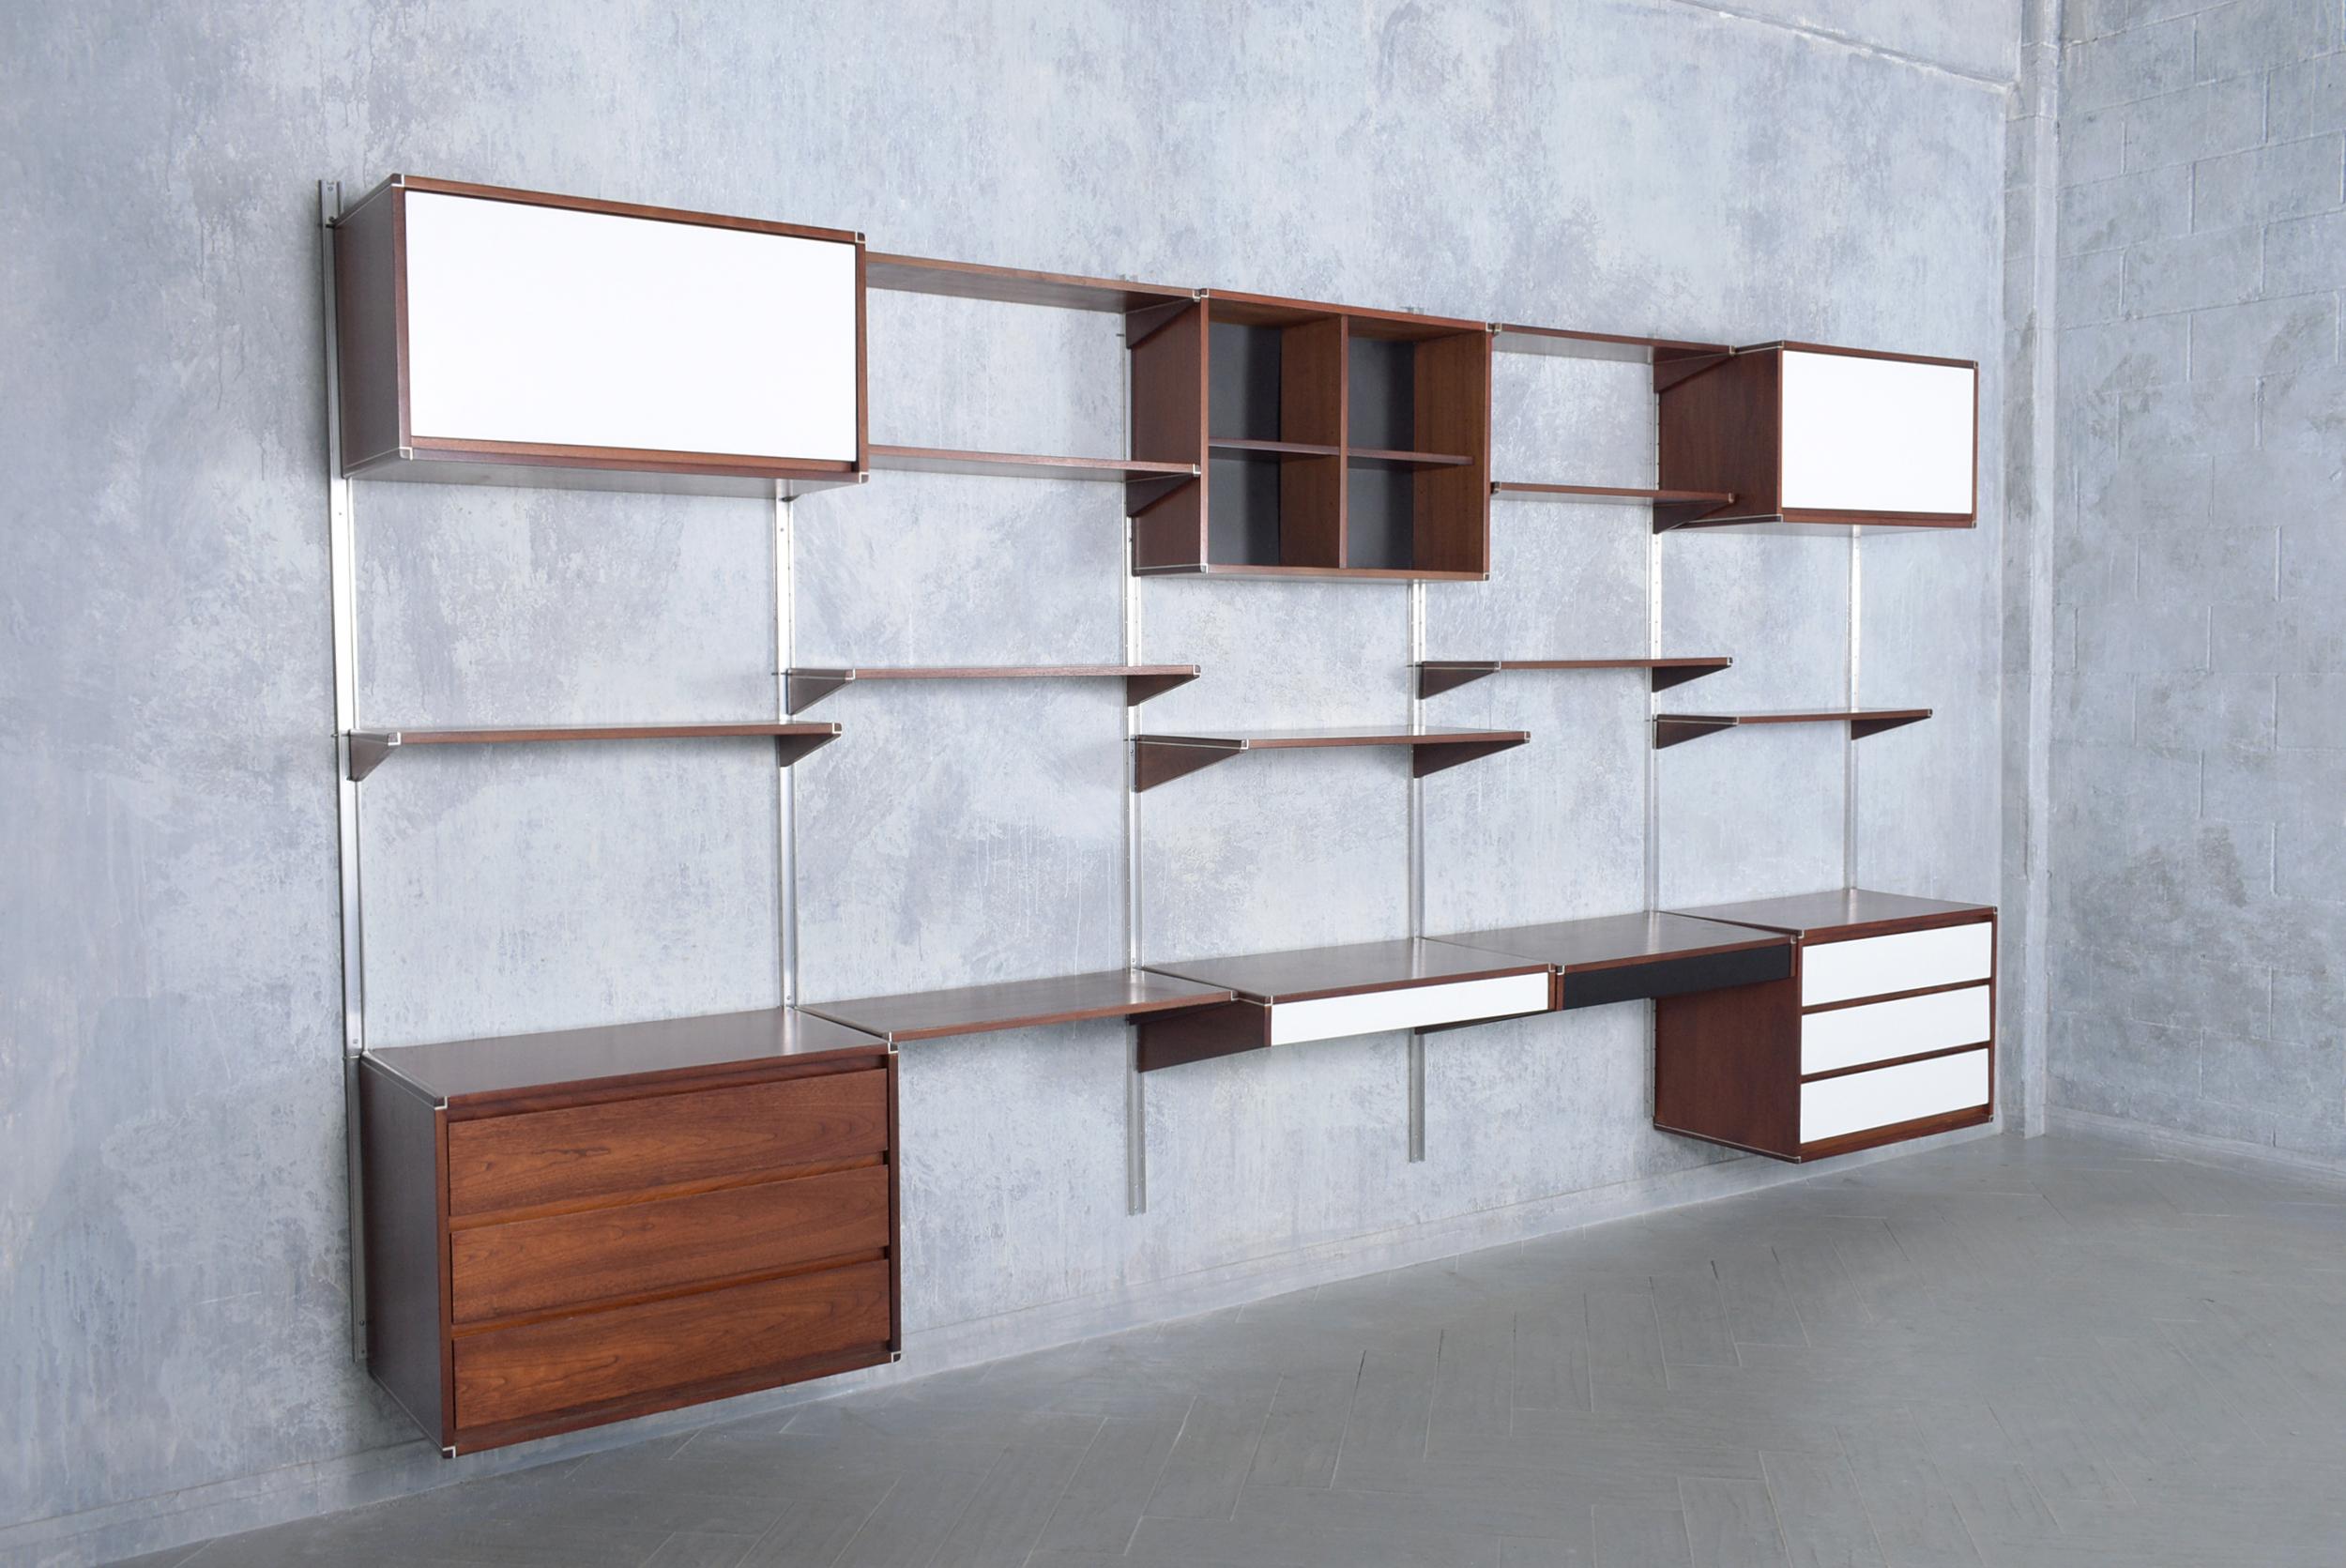 Step into the world of mid-century modern design with our circa 1960s Danish modern bookshelf meticulously handcrafted from mahogany and in superb condition. This piece has been completely restored and refinished by our team of expert craftsmen,